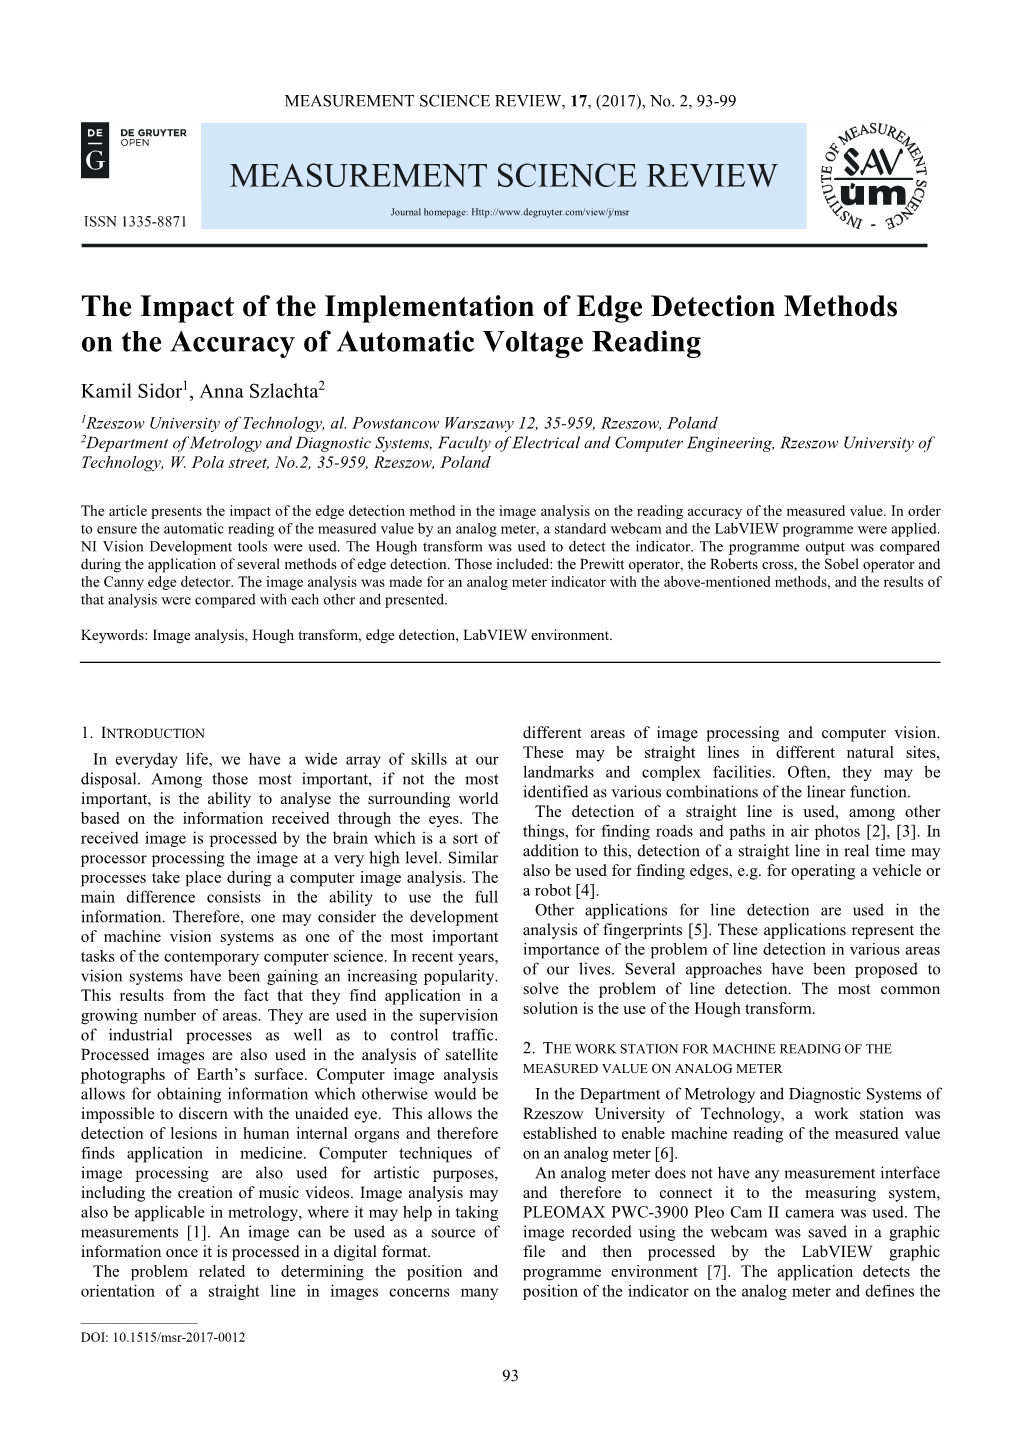 The Impact of the Implementation of Edge Detection Methods on the Accuracy of Automatic Voltage Reading